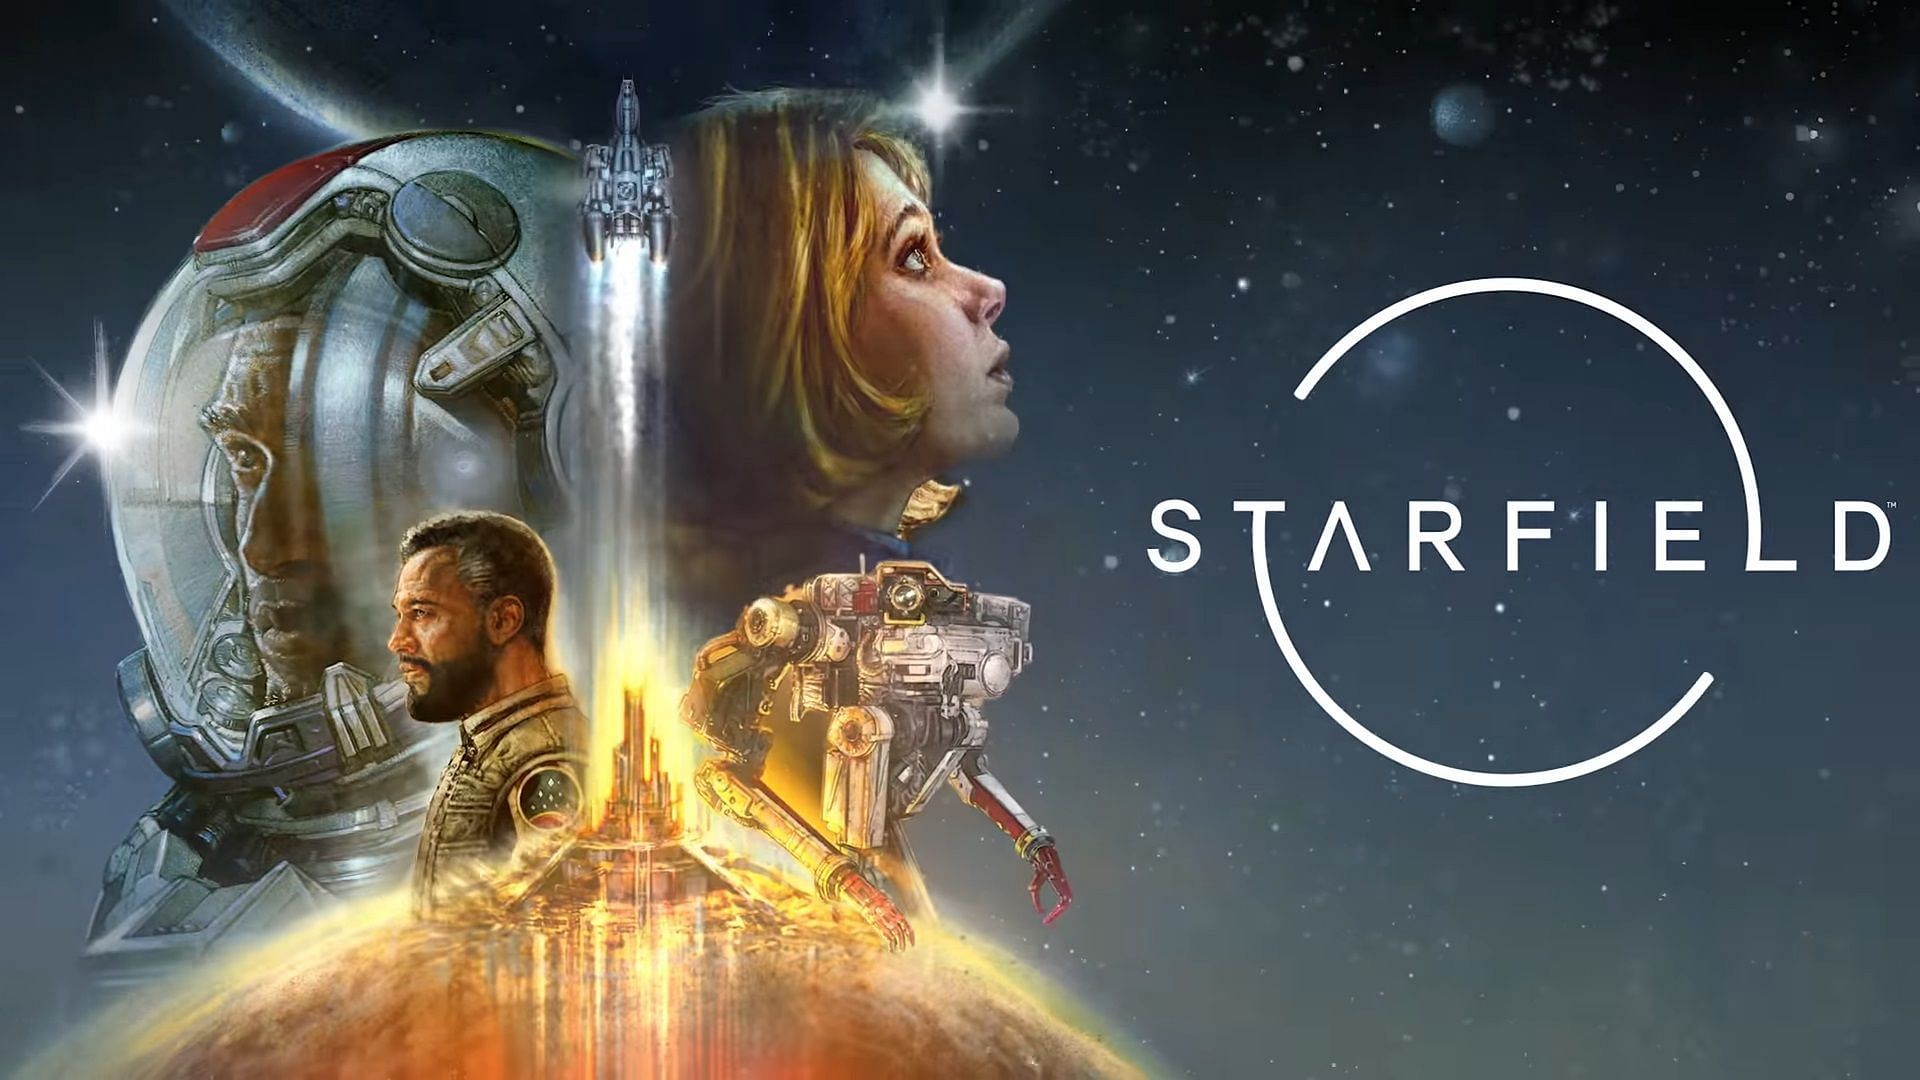 Starfield fans are happy with the leaked images dating back to 2018 (Image via Bethesda)